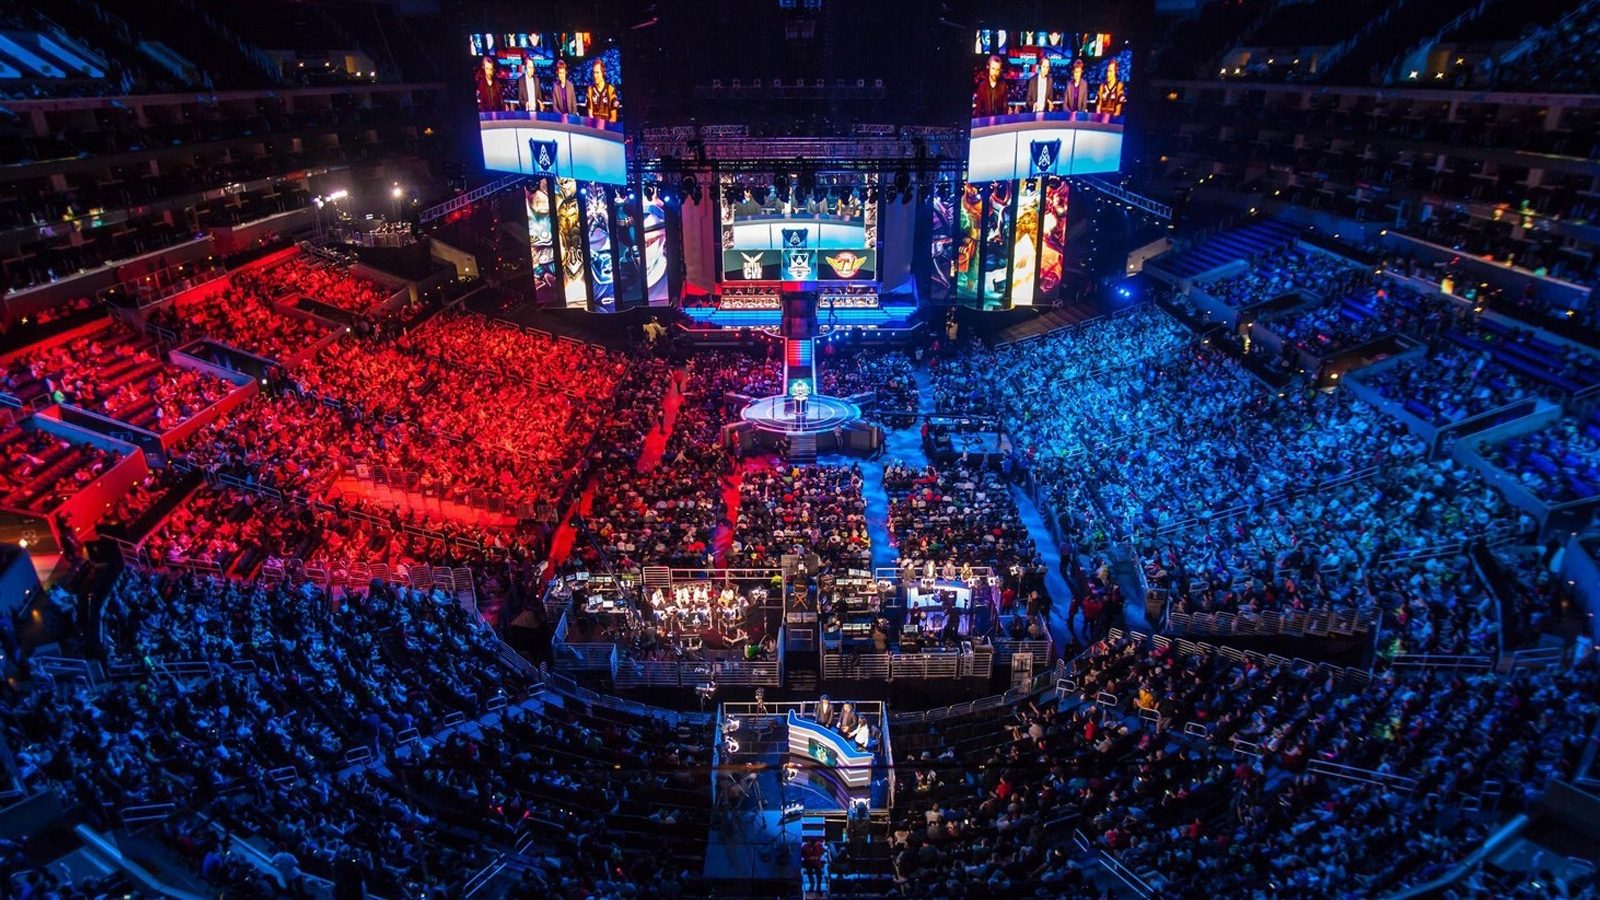 Full venue for a League of Legends event